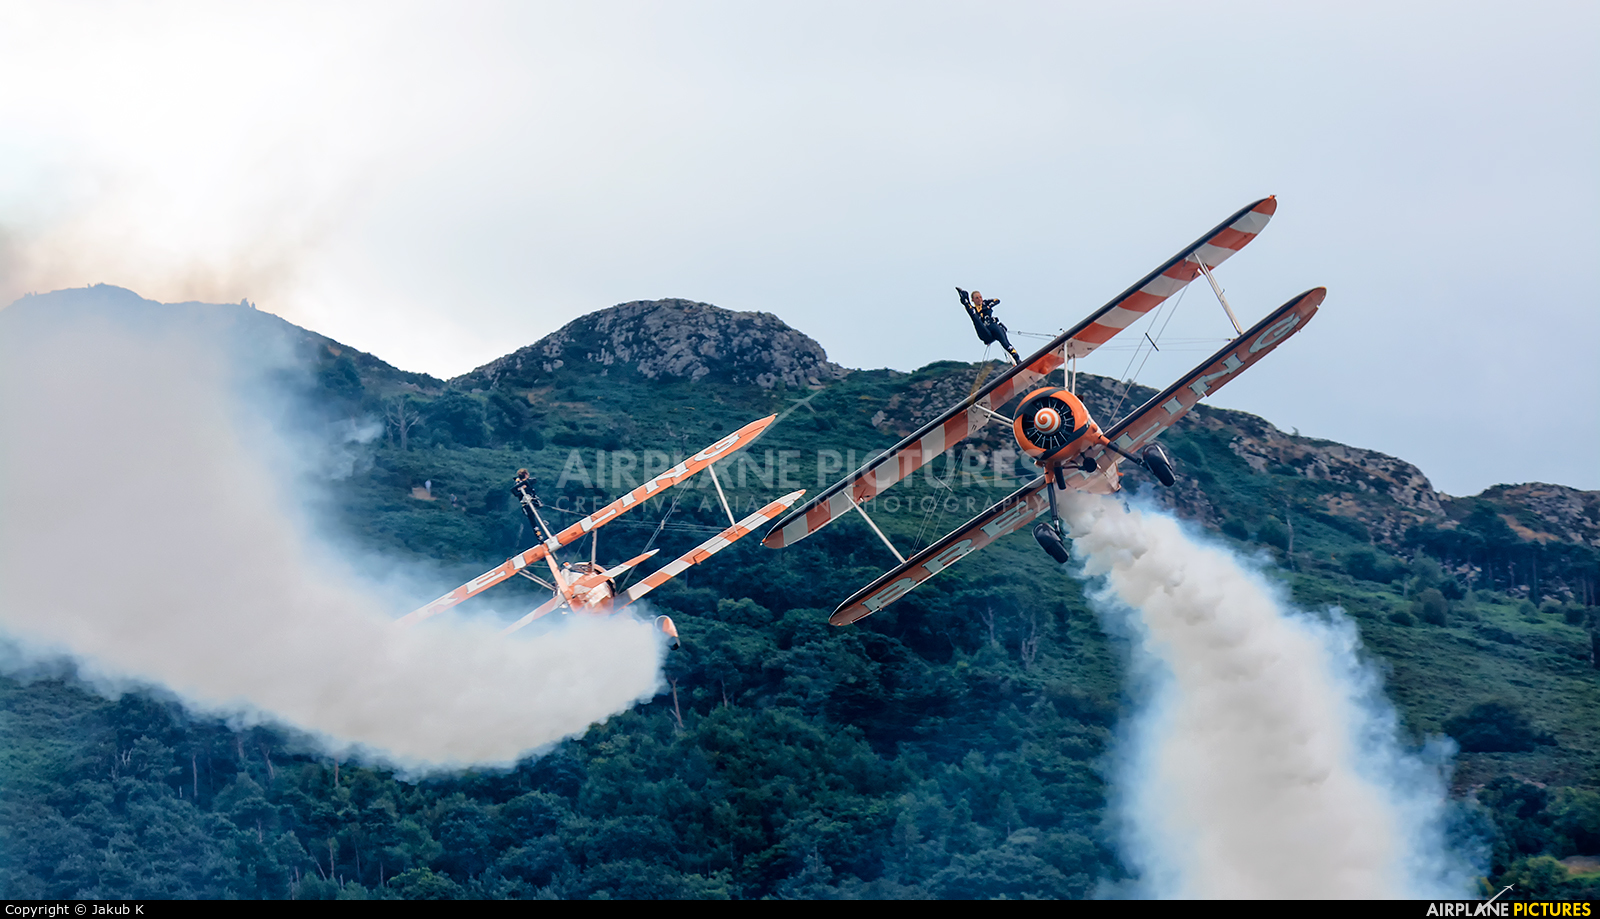 Breitling Wingwalkers N707TJ aircraft at Bray - Off Airport